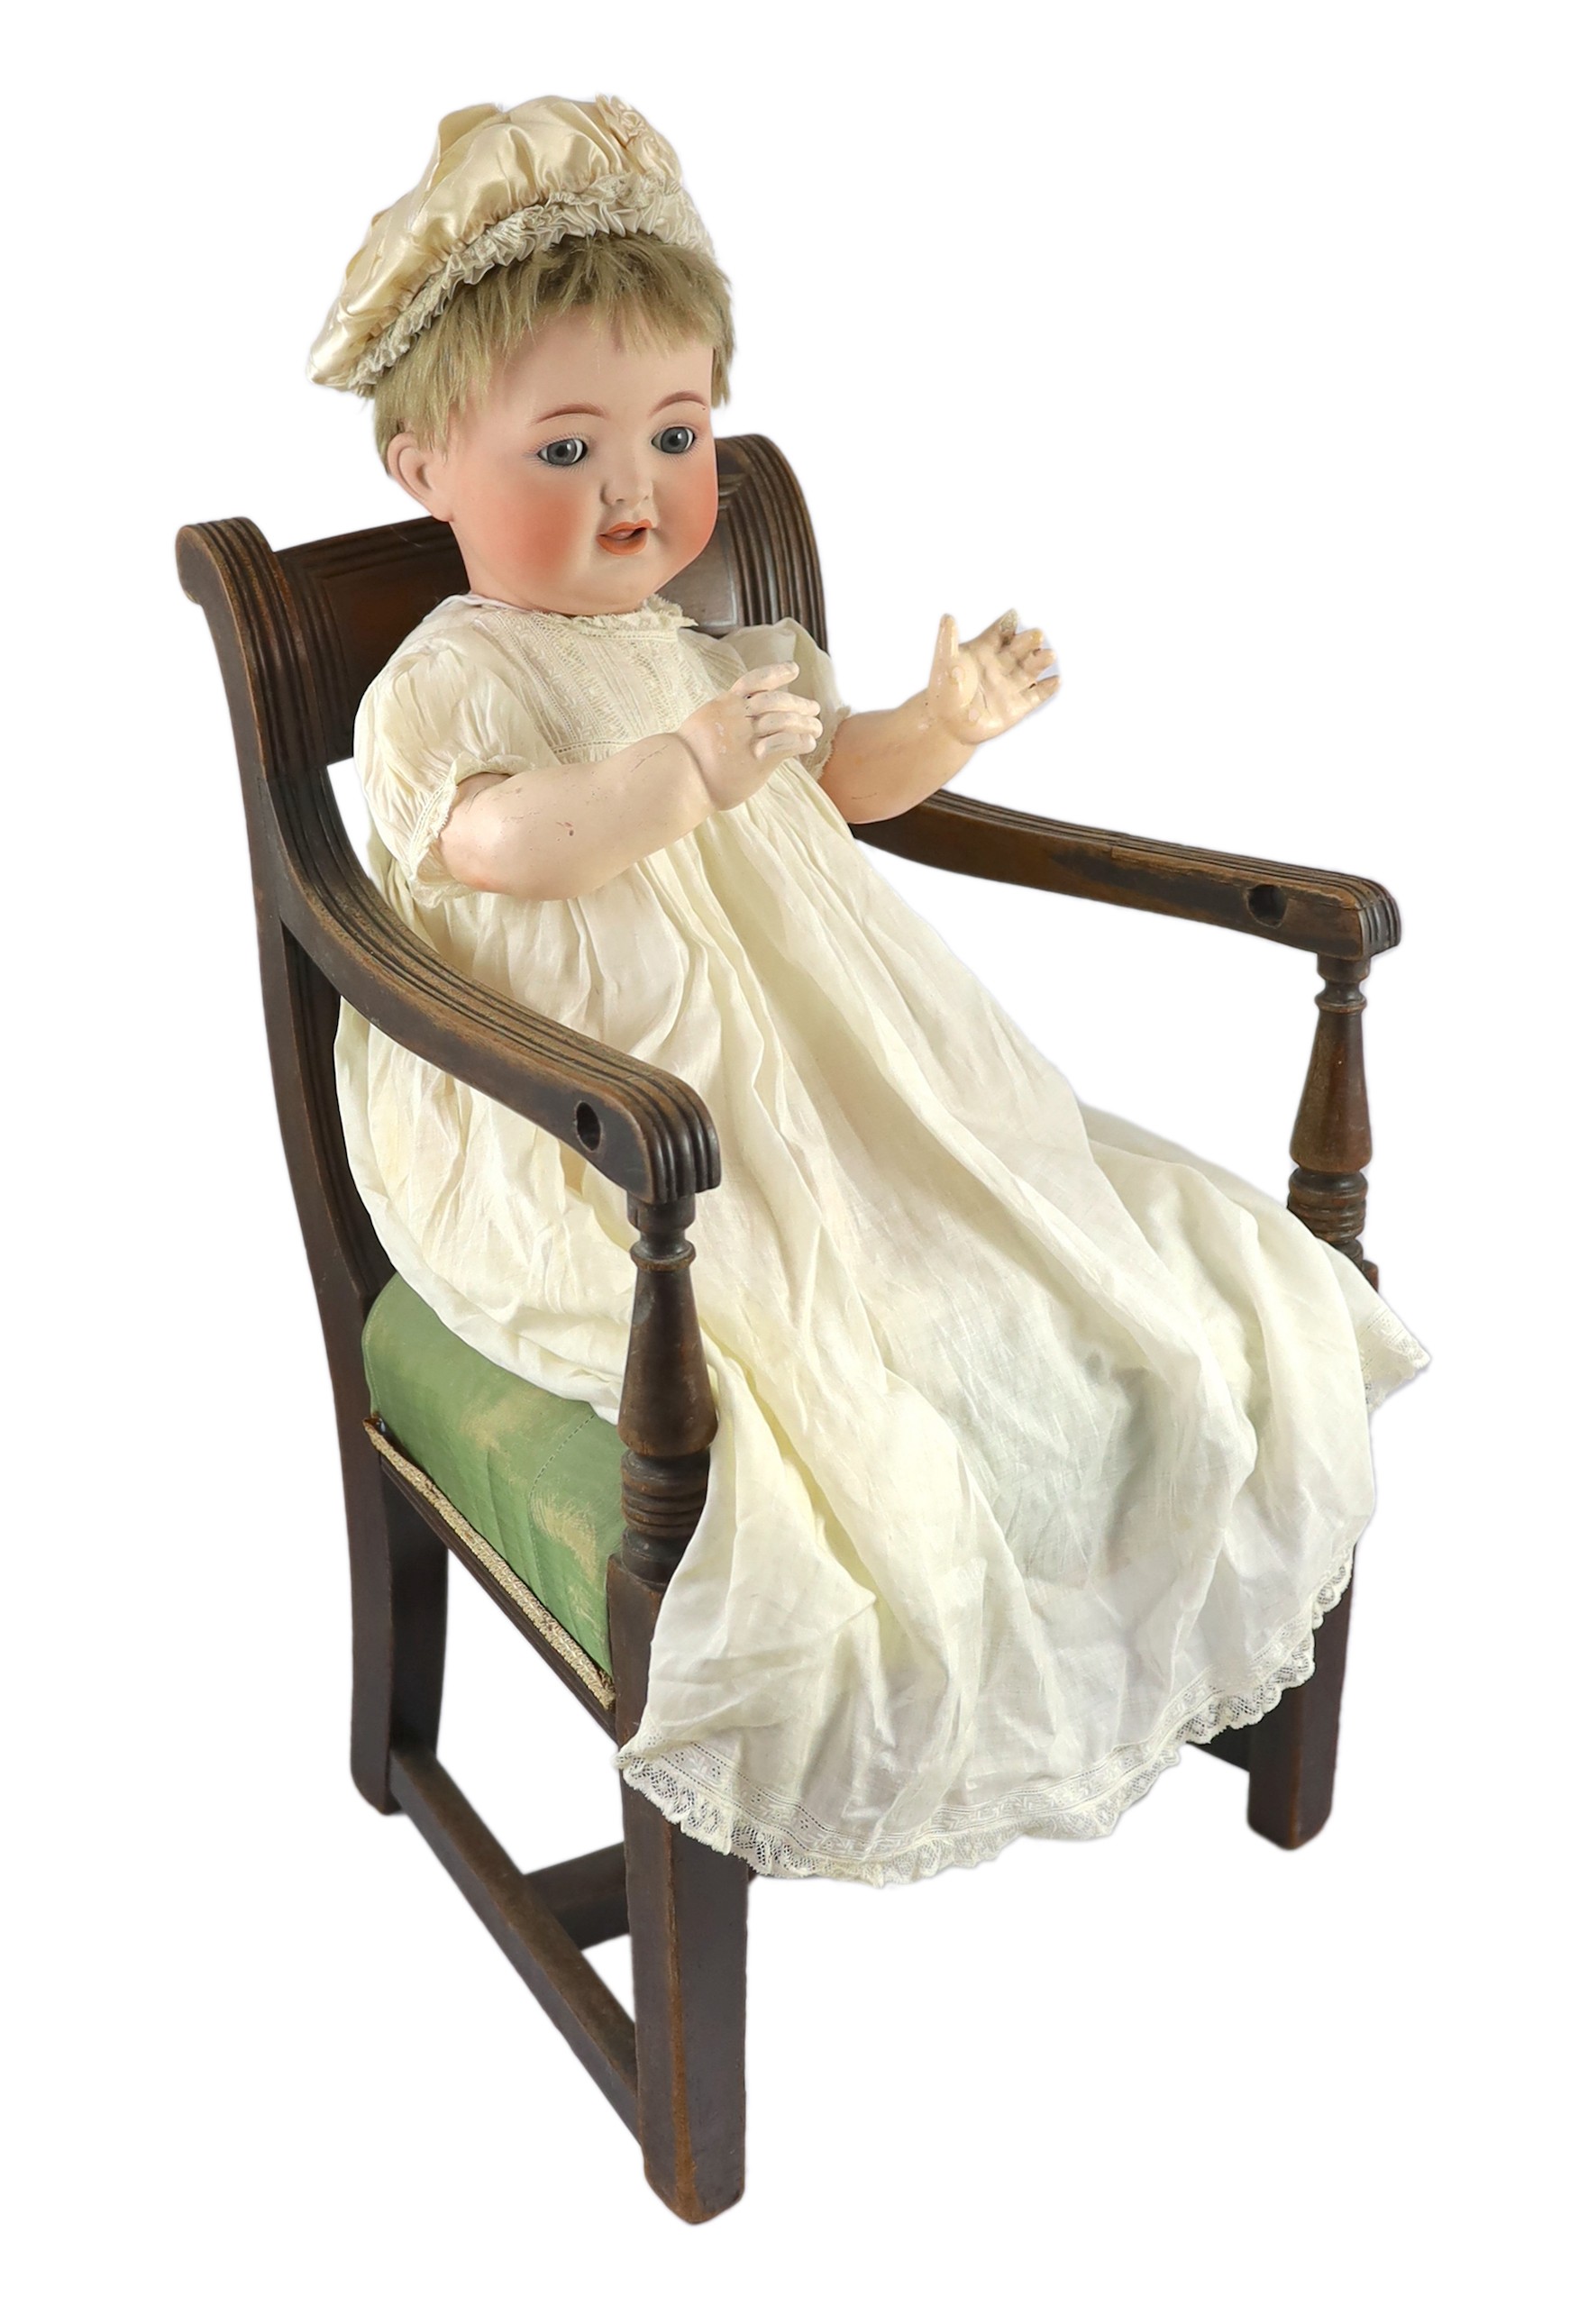 A Kammer & Reinhardt / Simon & Halbig bisque character doll, German, circa 1914, 20in. Please note the chair is for display purposes only.                                                                                  